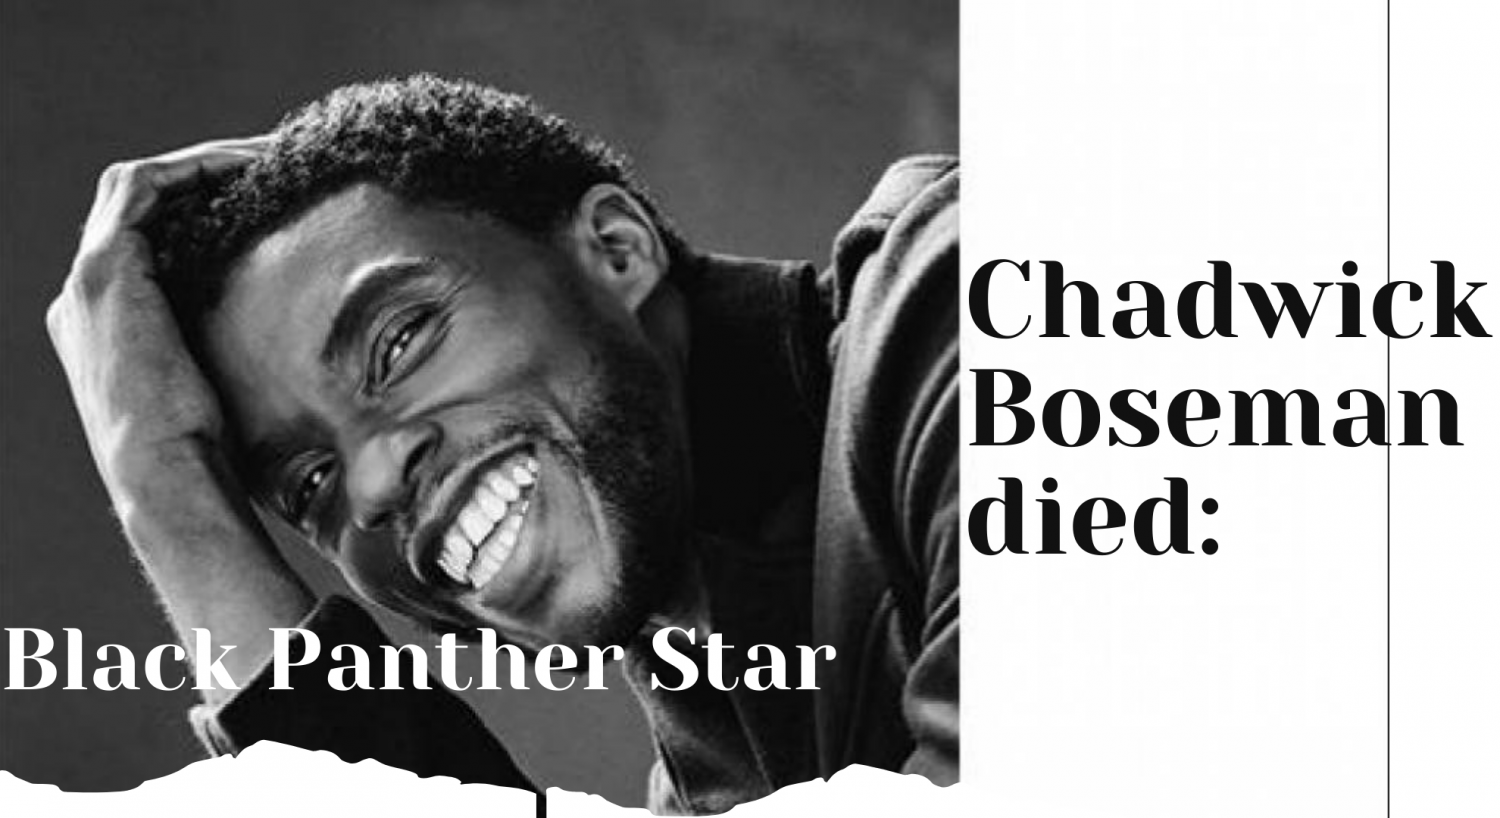 http://www.clubinfonline.com/wp-content/uploads/2020/08/Black-Panther-Star-Chadwick-Boseman-died-today.png